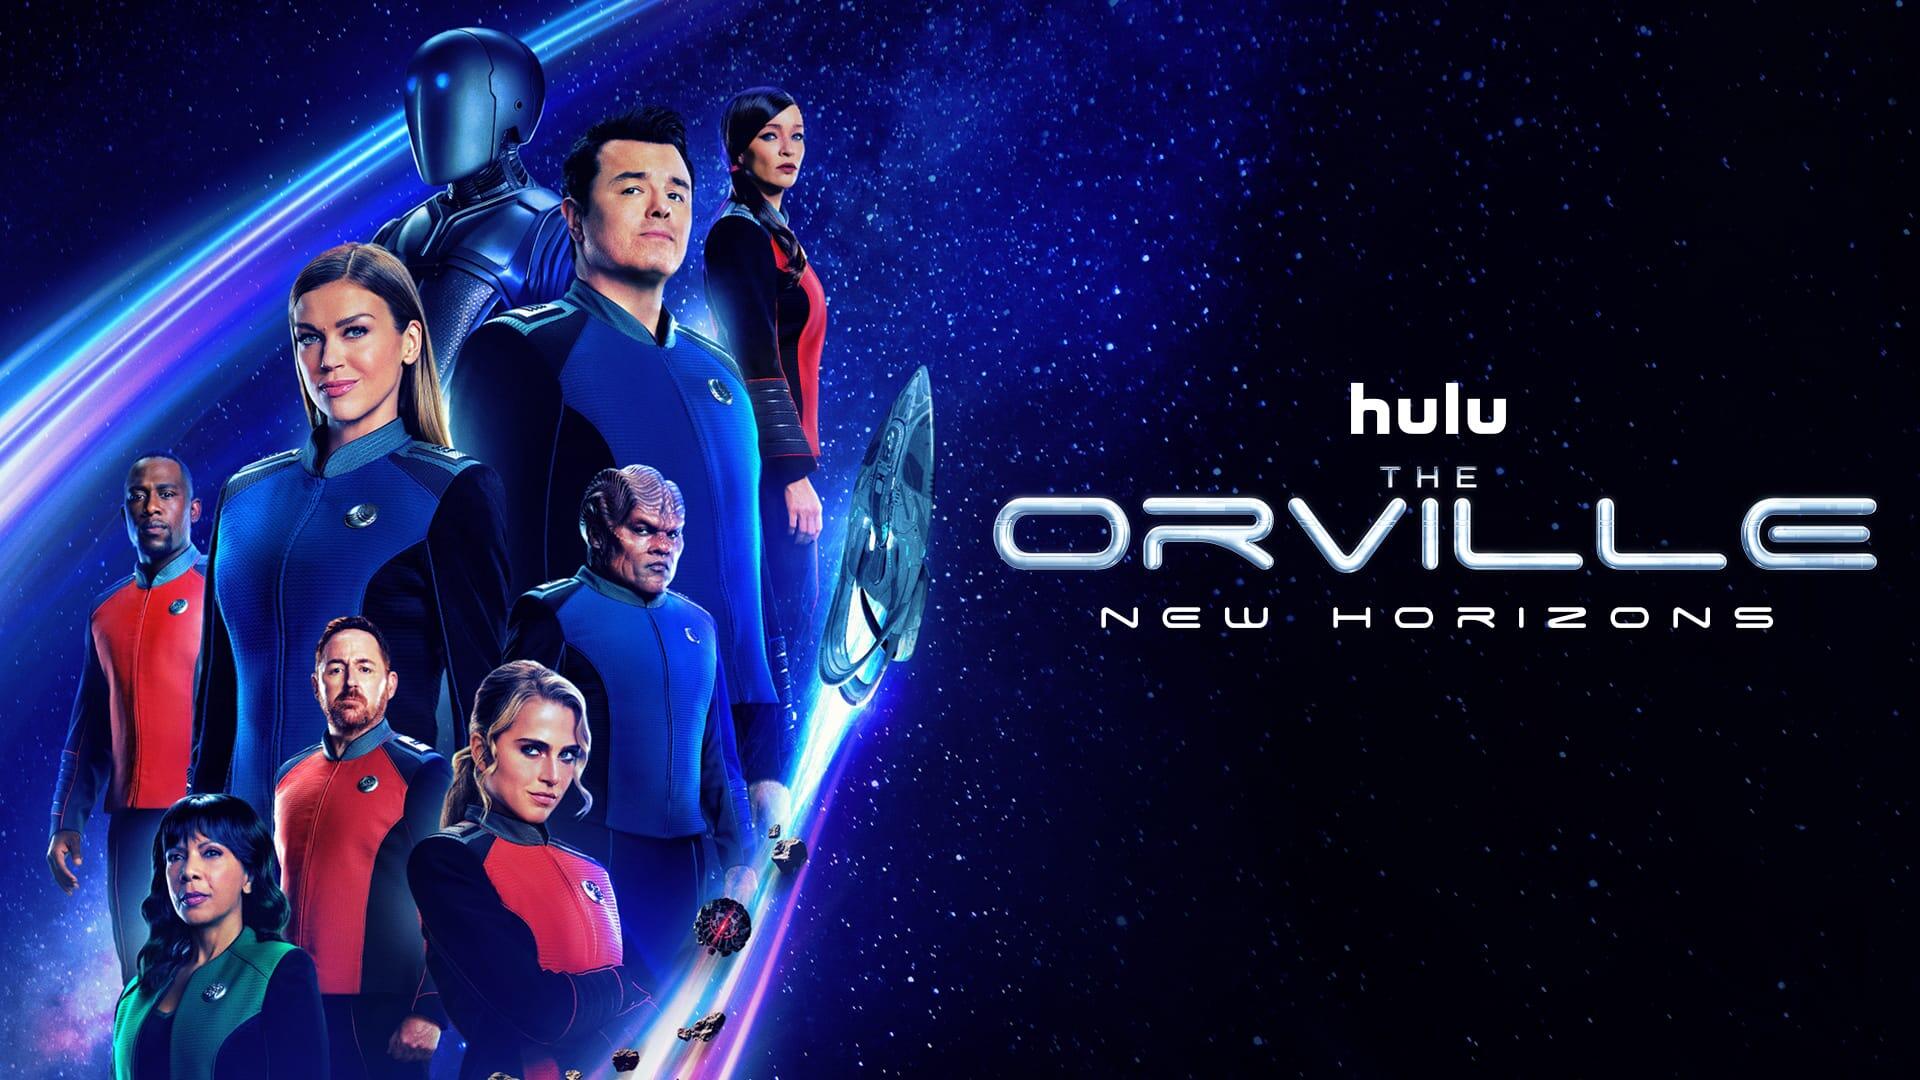 The Orville: New Horizons -- Seth MacFarlane’s epic space adventure series “The Orville” returns exclusively as a Hulu original series. Set 400 years in the future, “The Orville: New Horizons” finds the crew of the U.S.S. Orville continuing their mission of exploration, as they navigate both the mysteries of the universe and the complexities of their own interpersonal relationships. (Courtesy of Hulu)